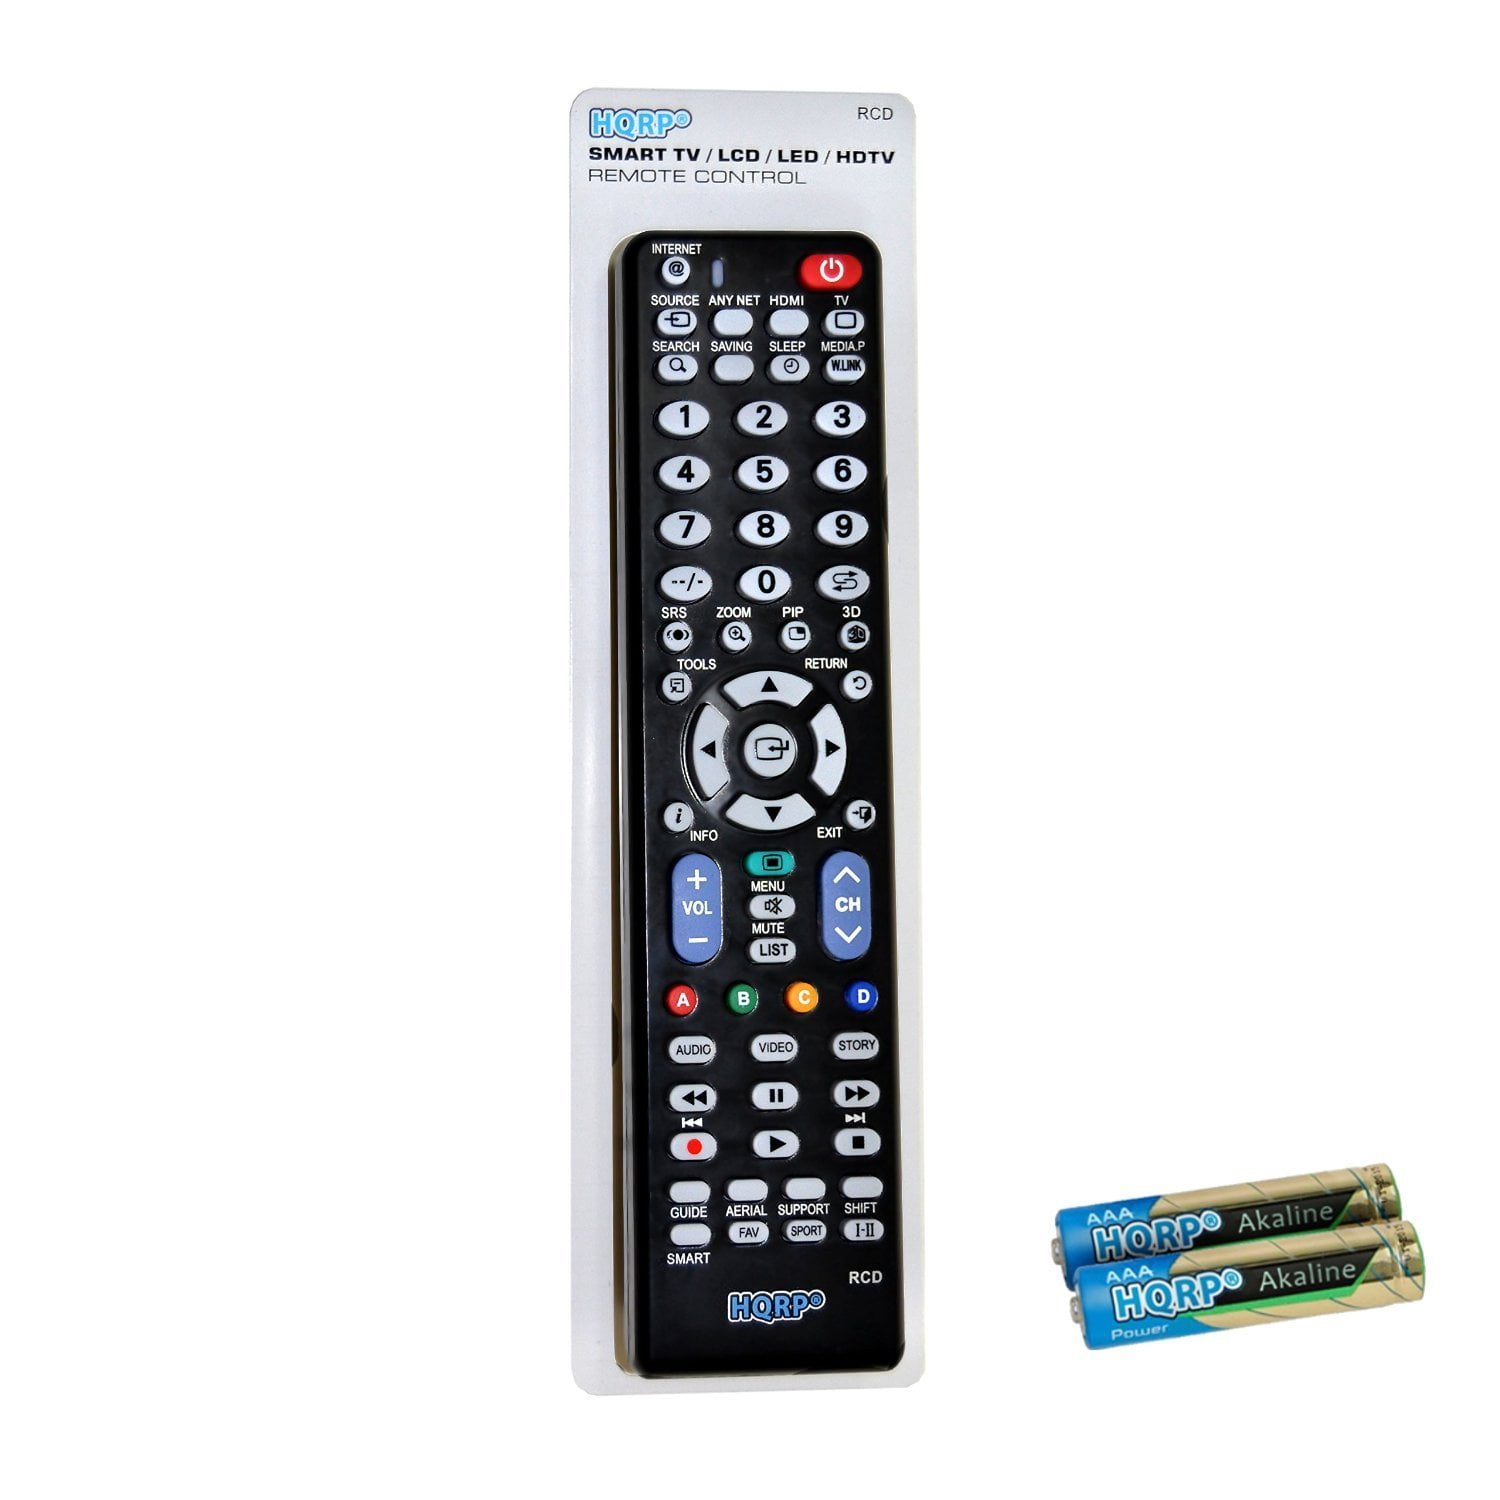 COMPATIBLE REMOTE CONTROL FOR SAMSUNG TV HP-S5053 HP-S5073 